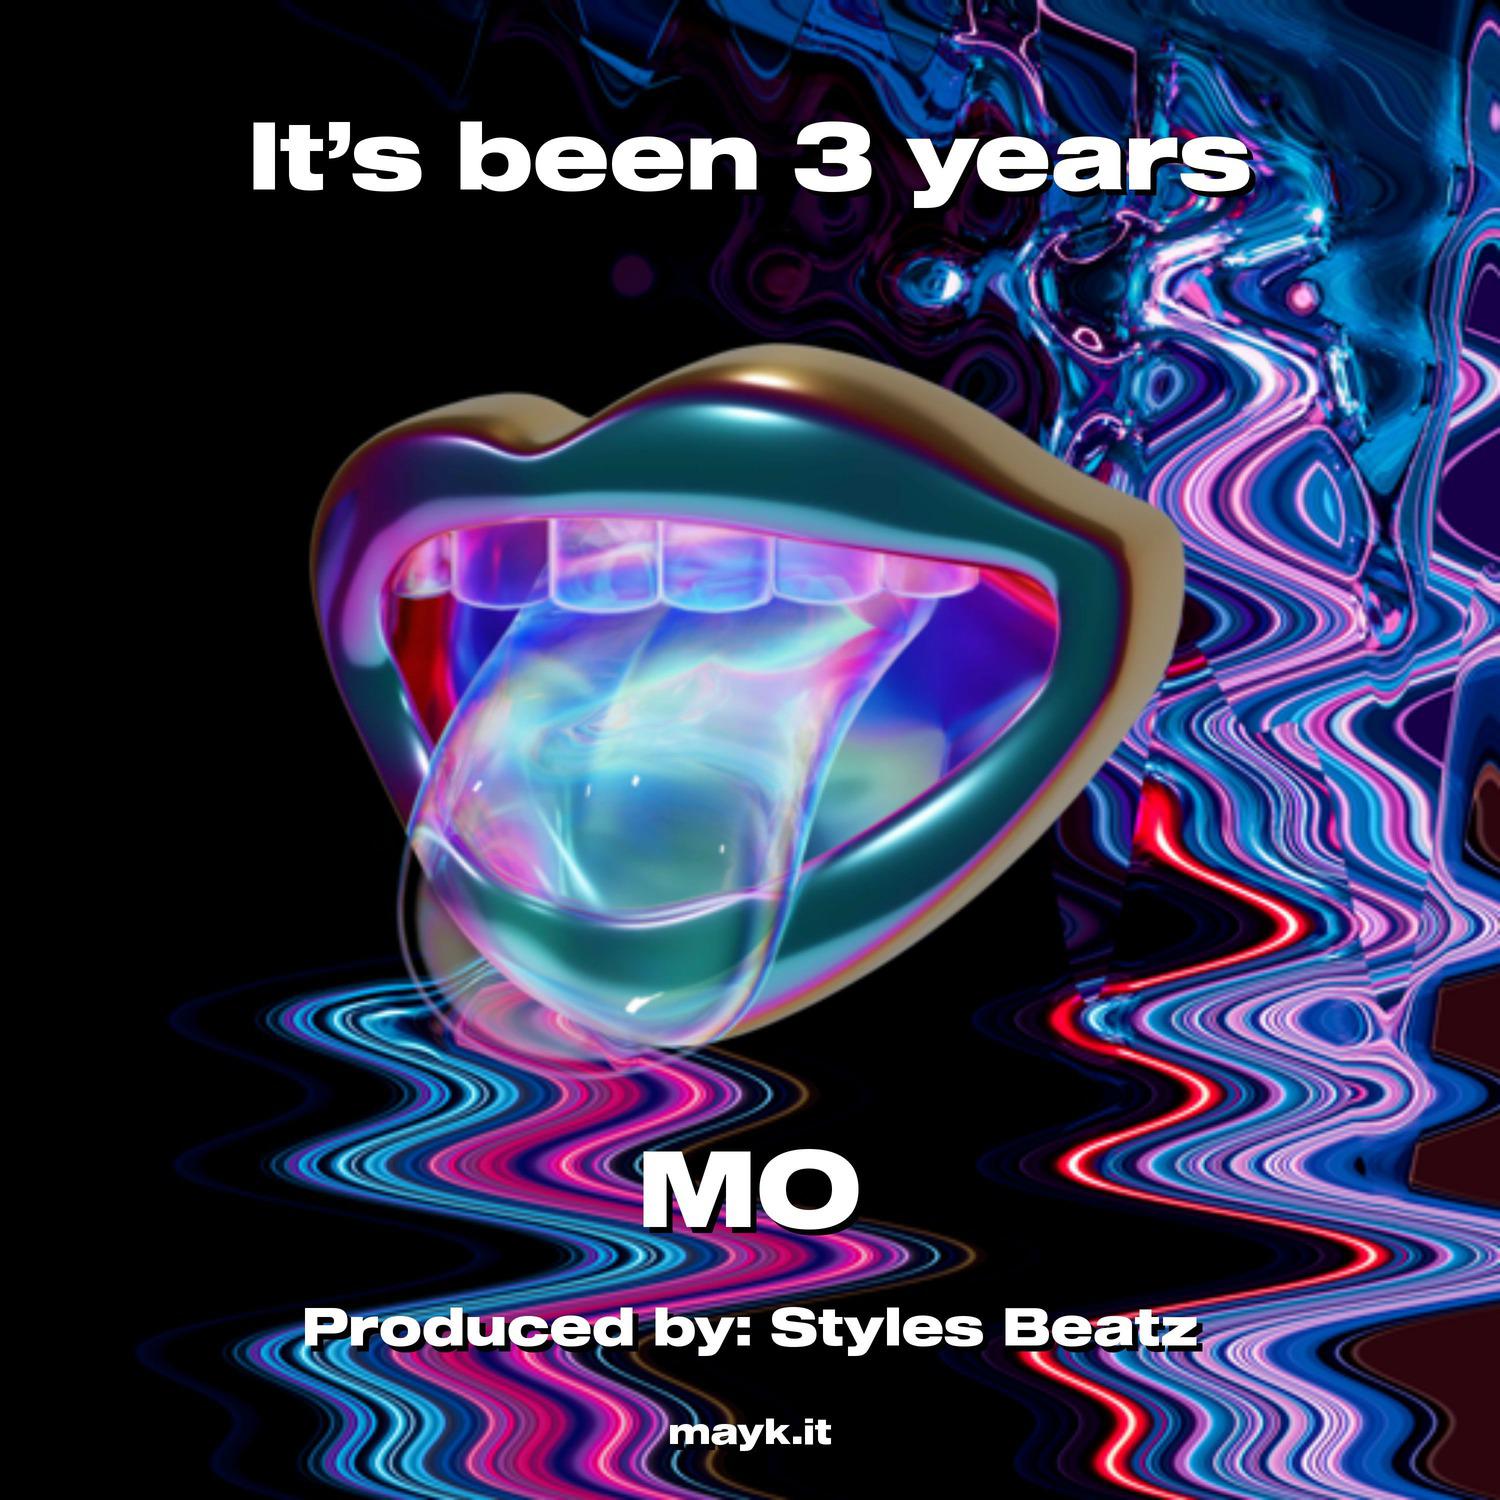 Mo - It’s been 3 years